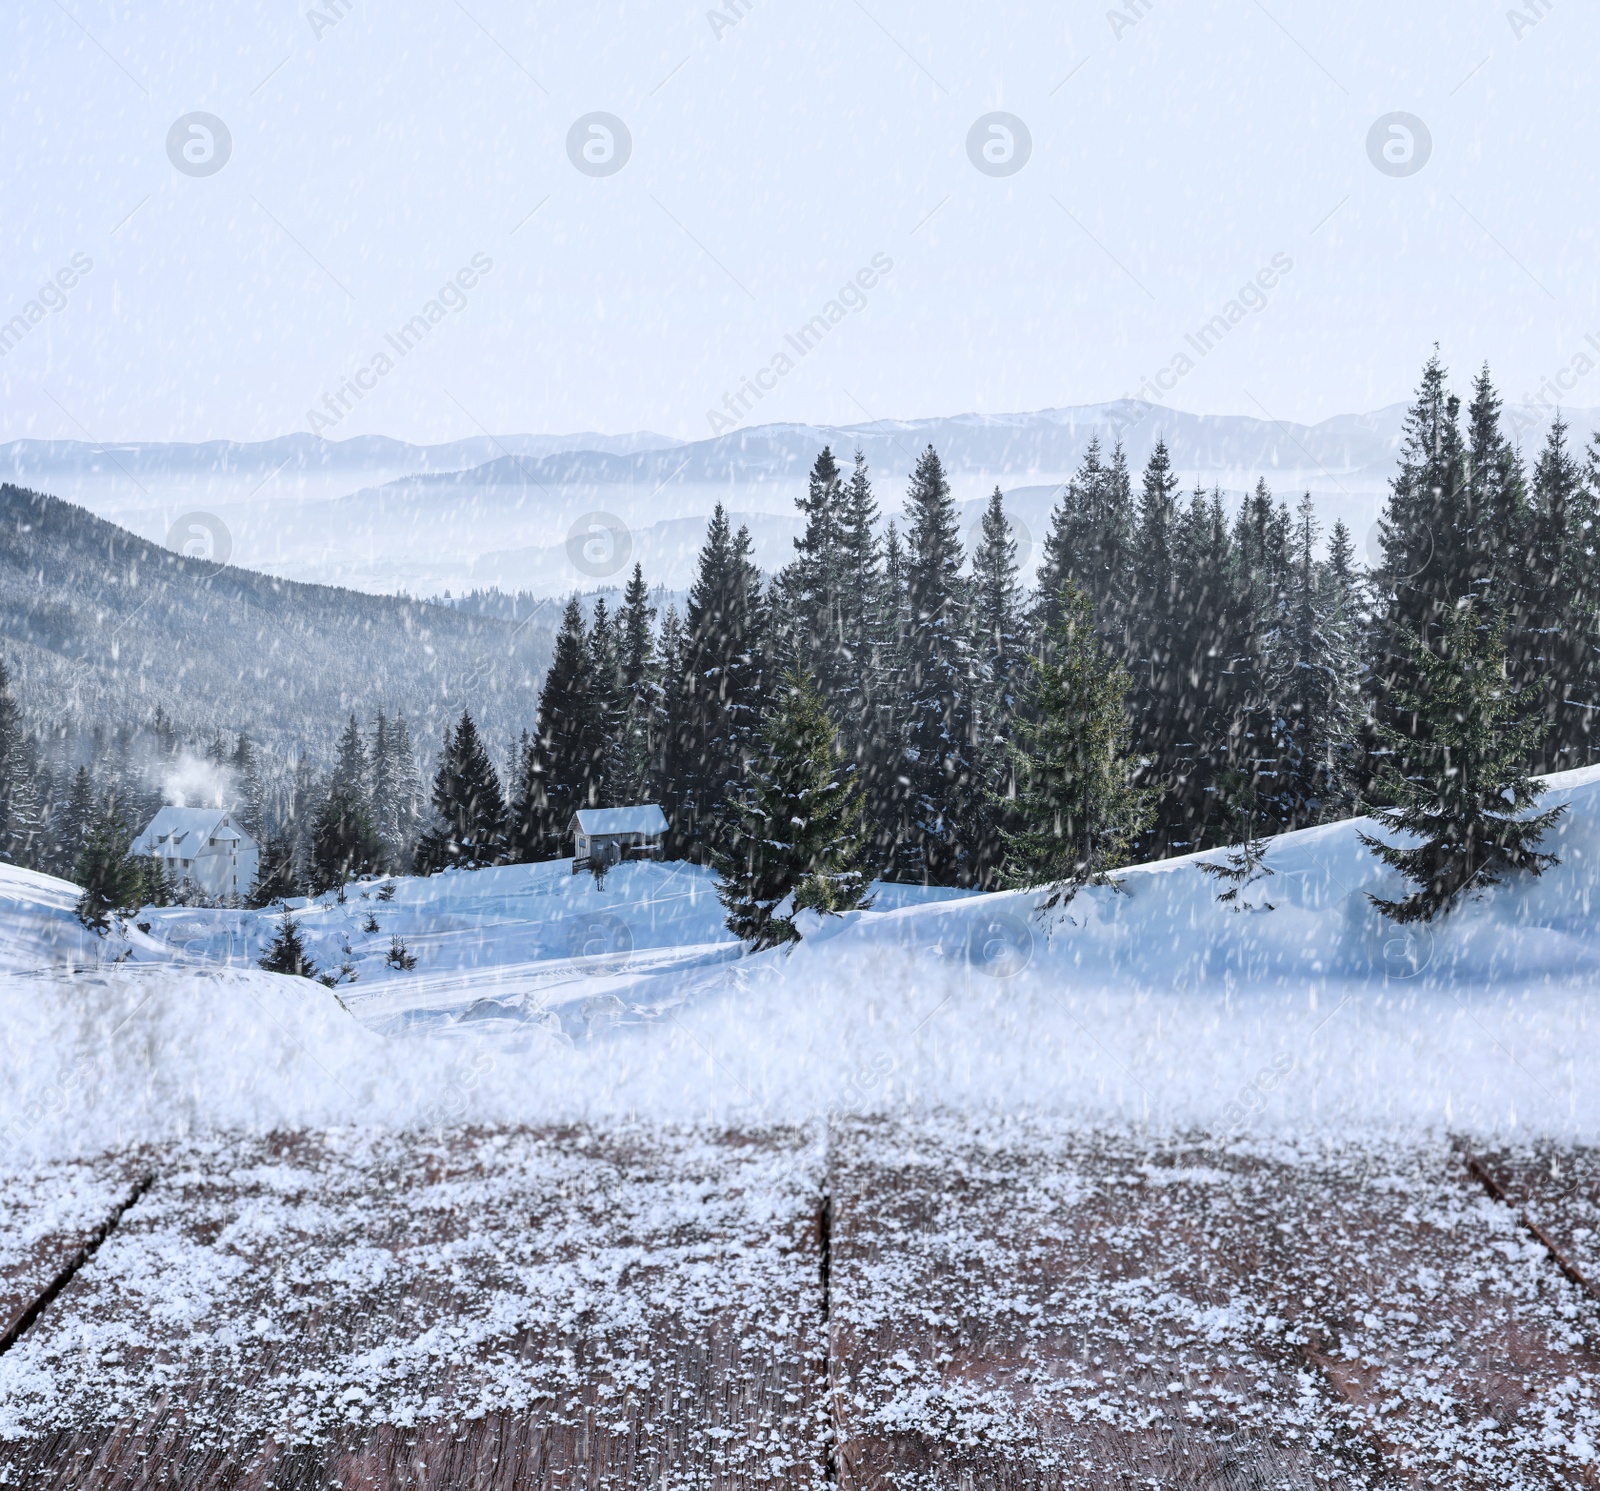 Image of Wooden surface and beautiful view of winter landscape 